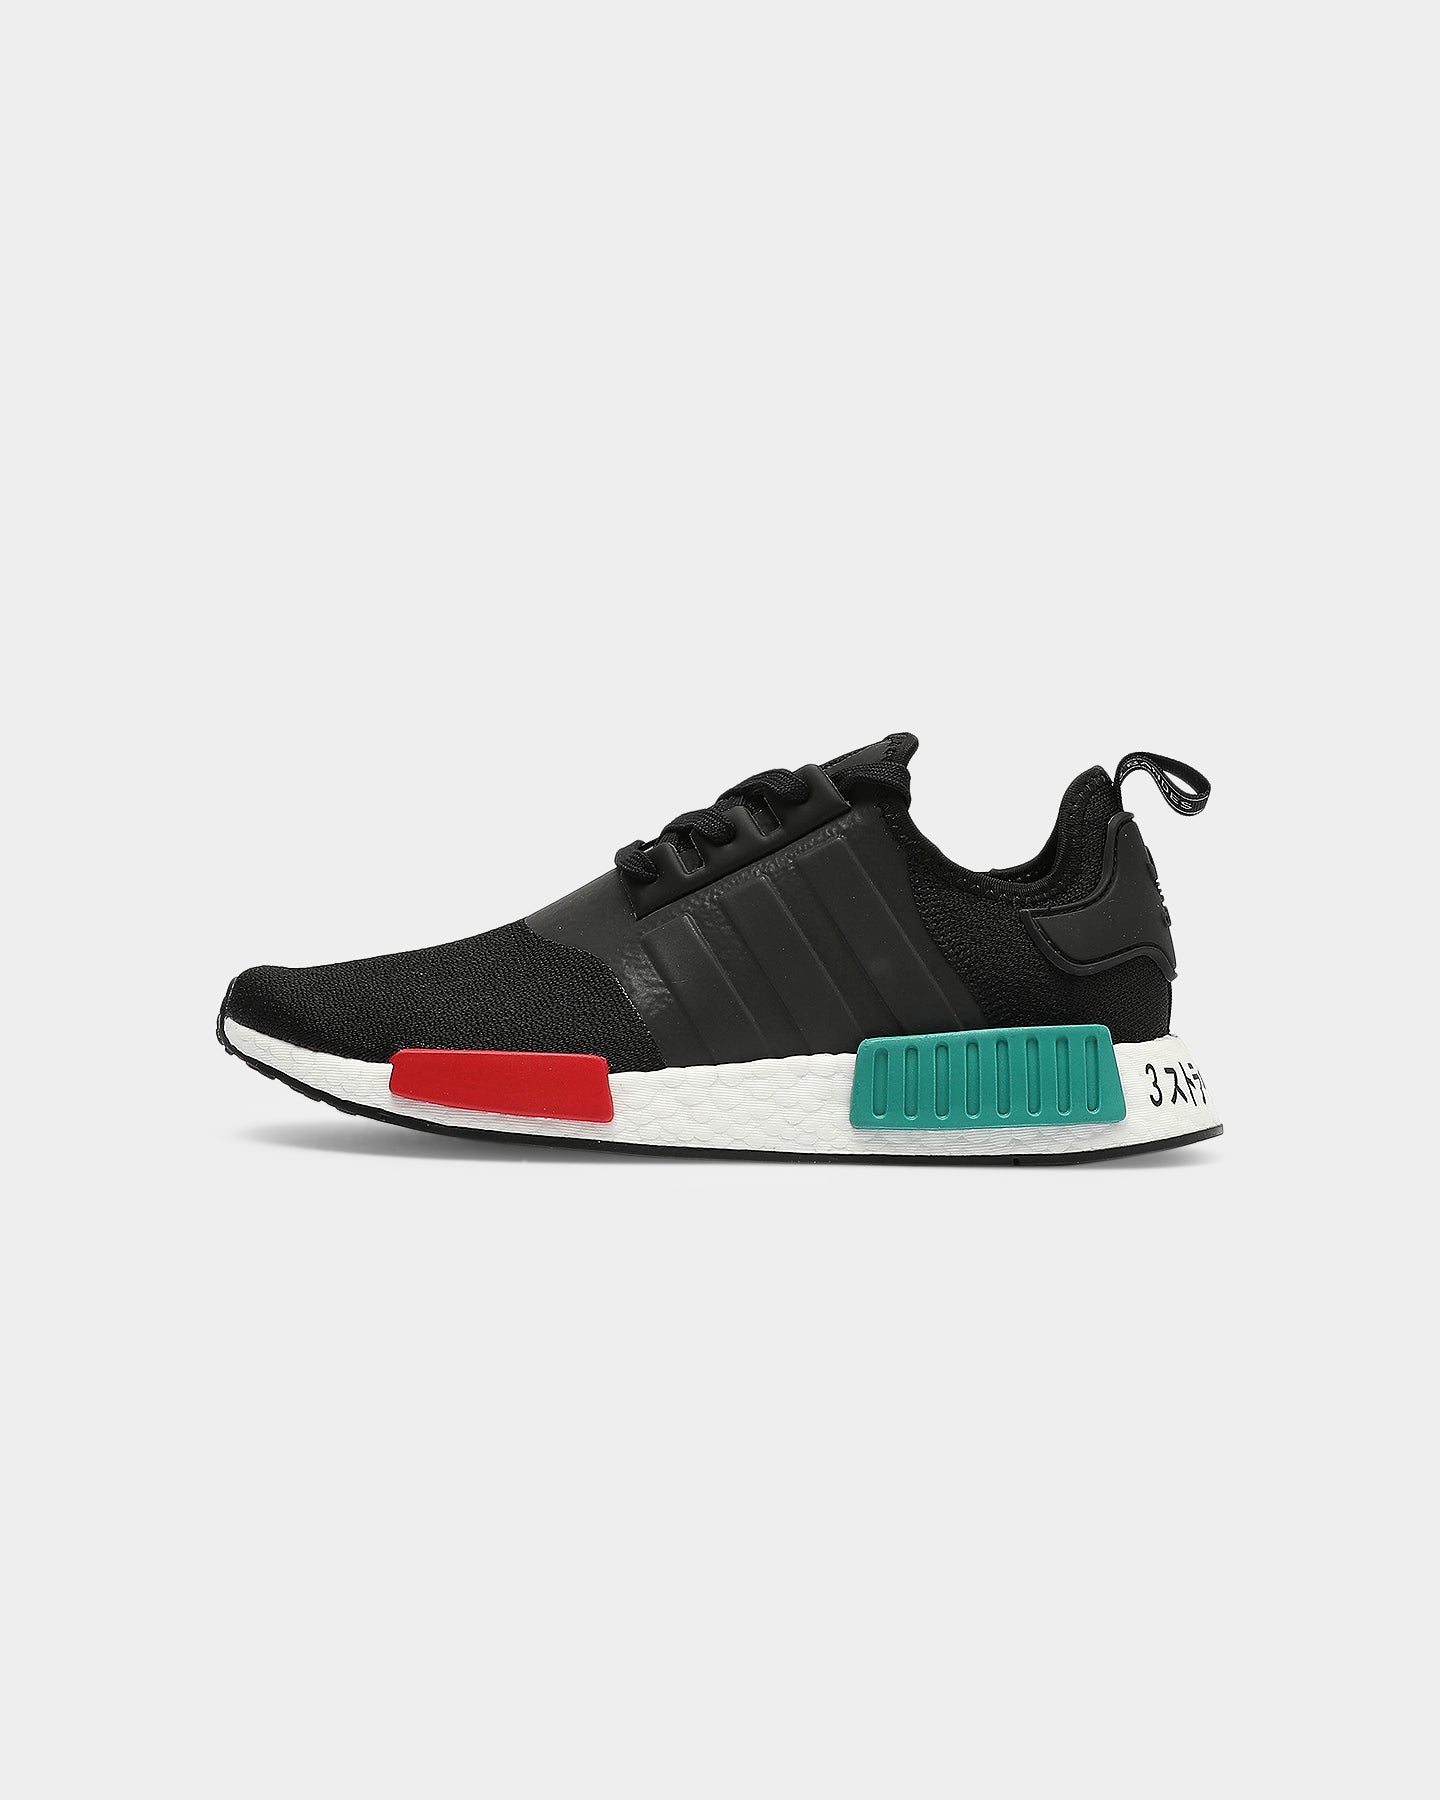 nmd r1 green and black